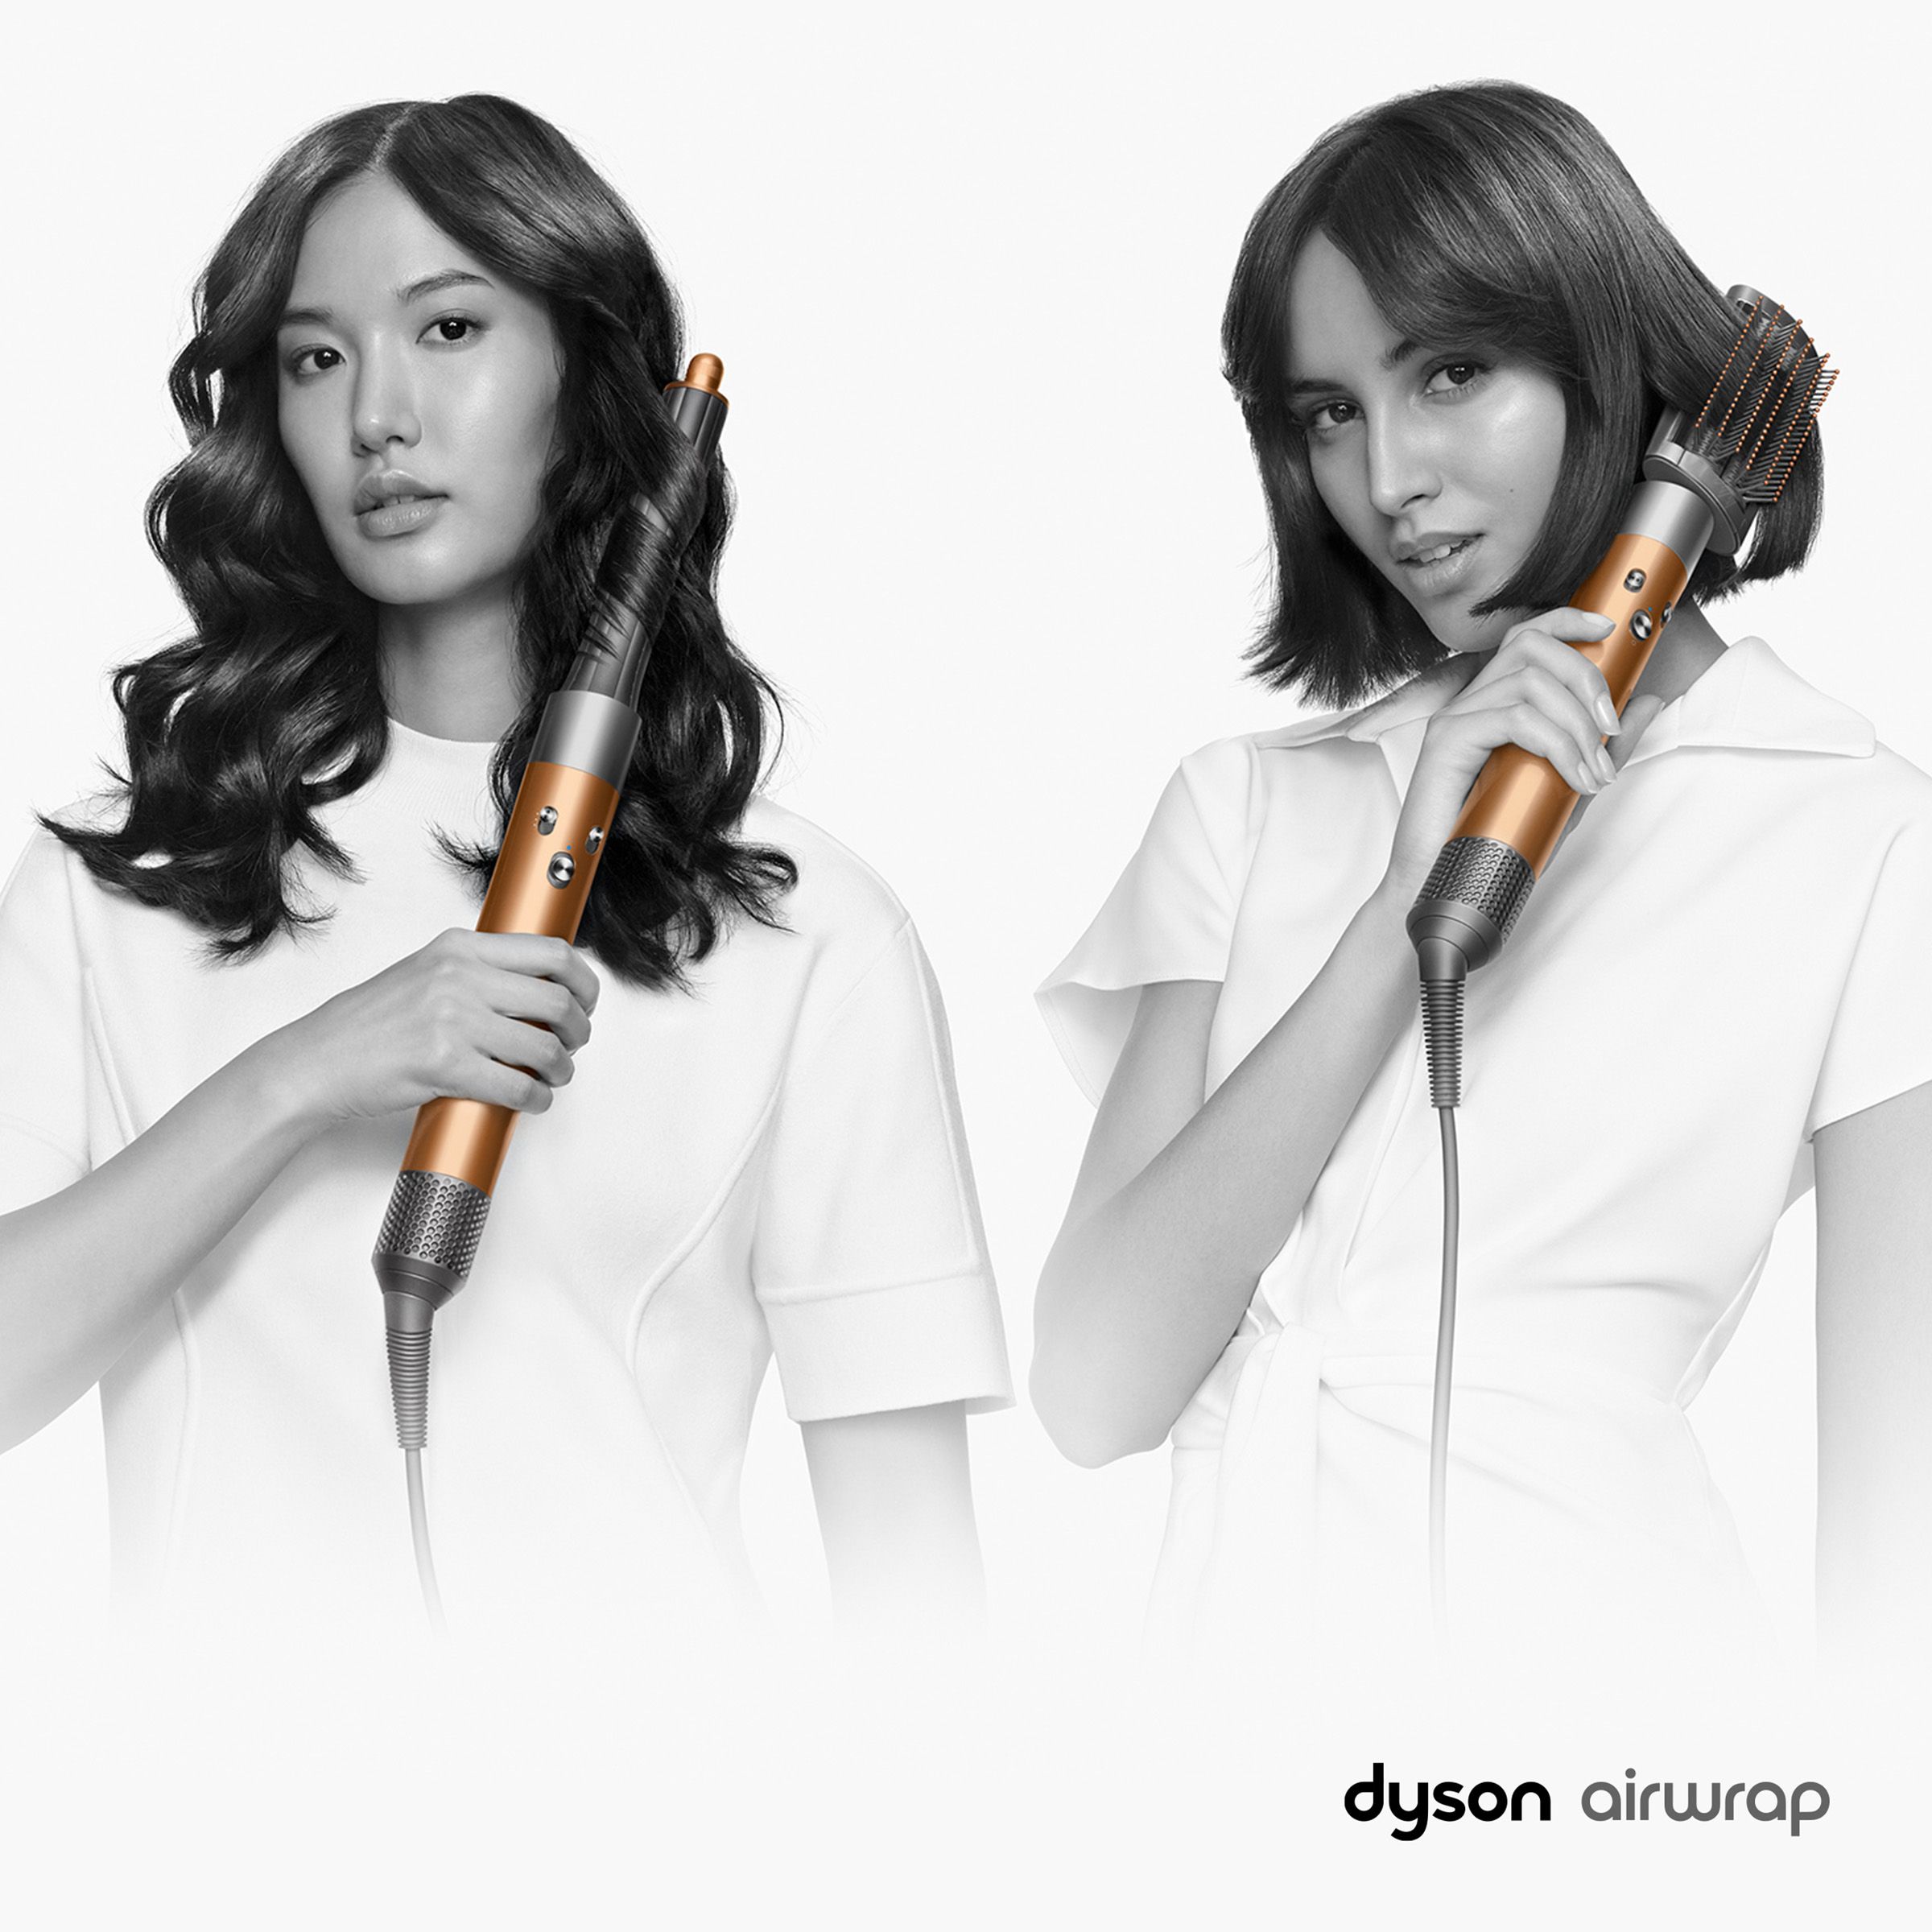 Dyson AirwrapTM multi-styler Pioneers of Coanda styling. The only multi-styler to curl, shape and hide flyaways using the Coanda effect. Exclusive to John Lewis & Partners